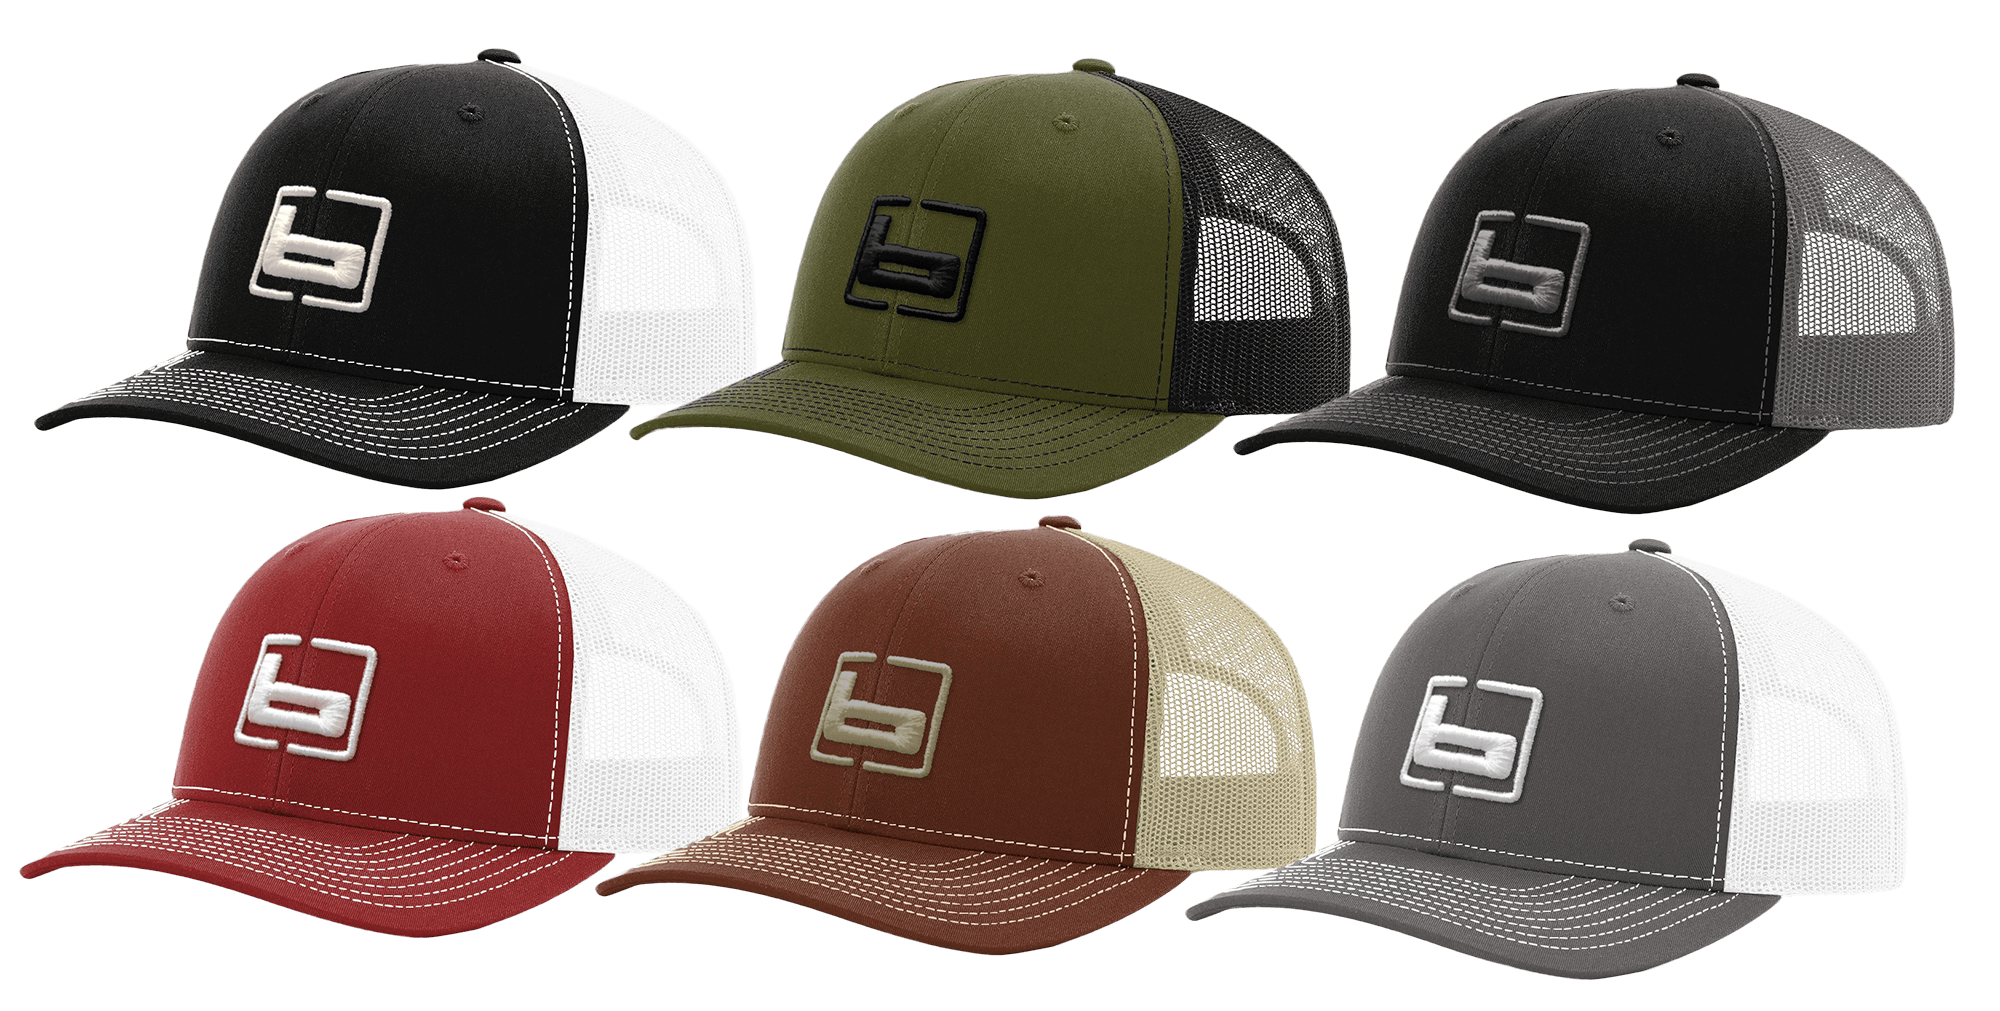 Banded R112 Trucker Caps - Banded Hunting Gear